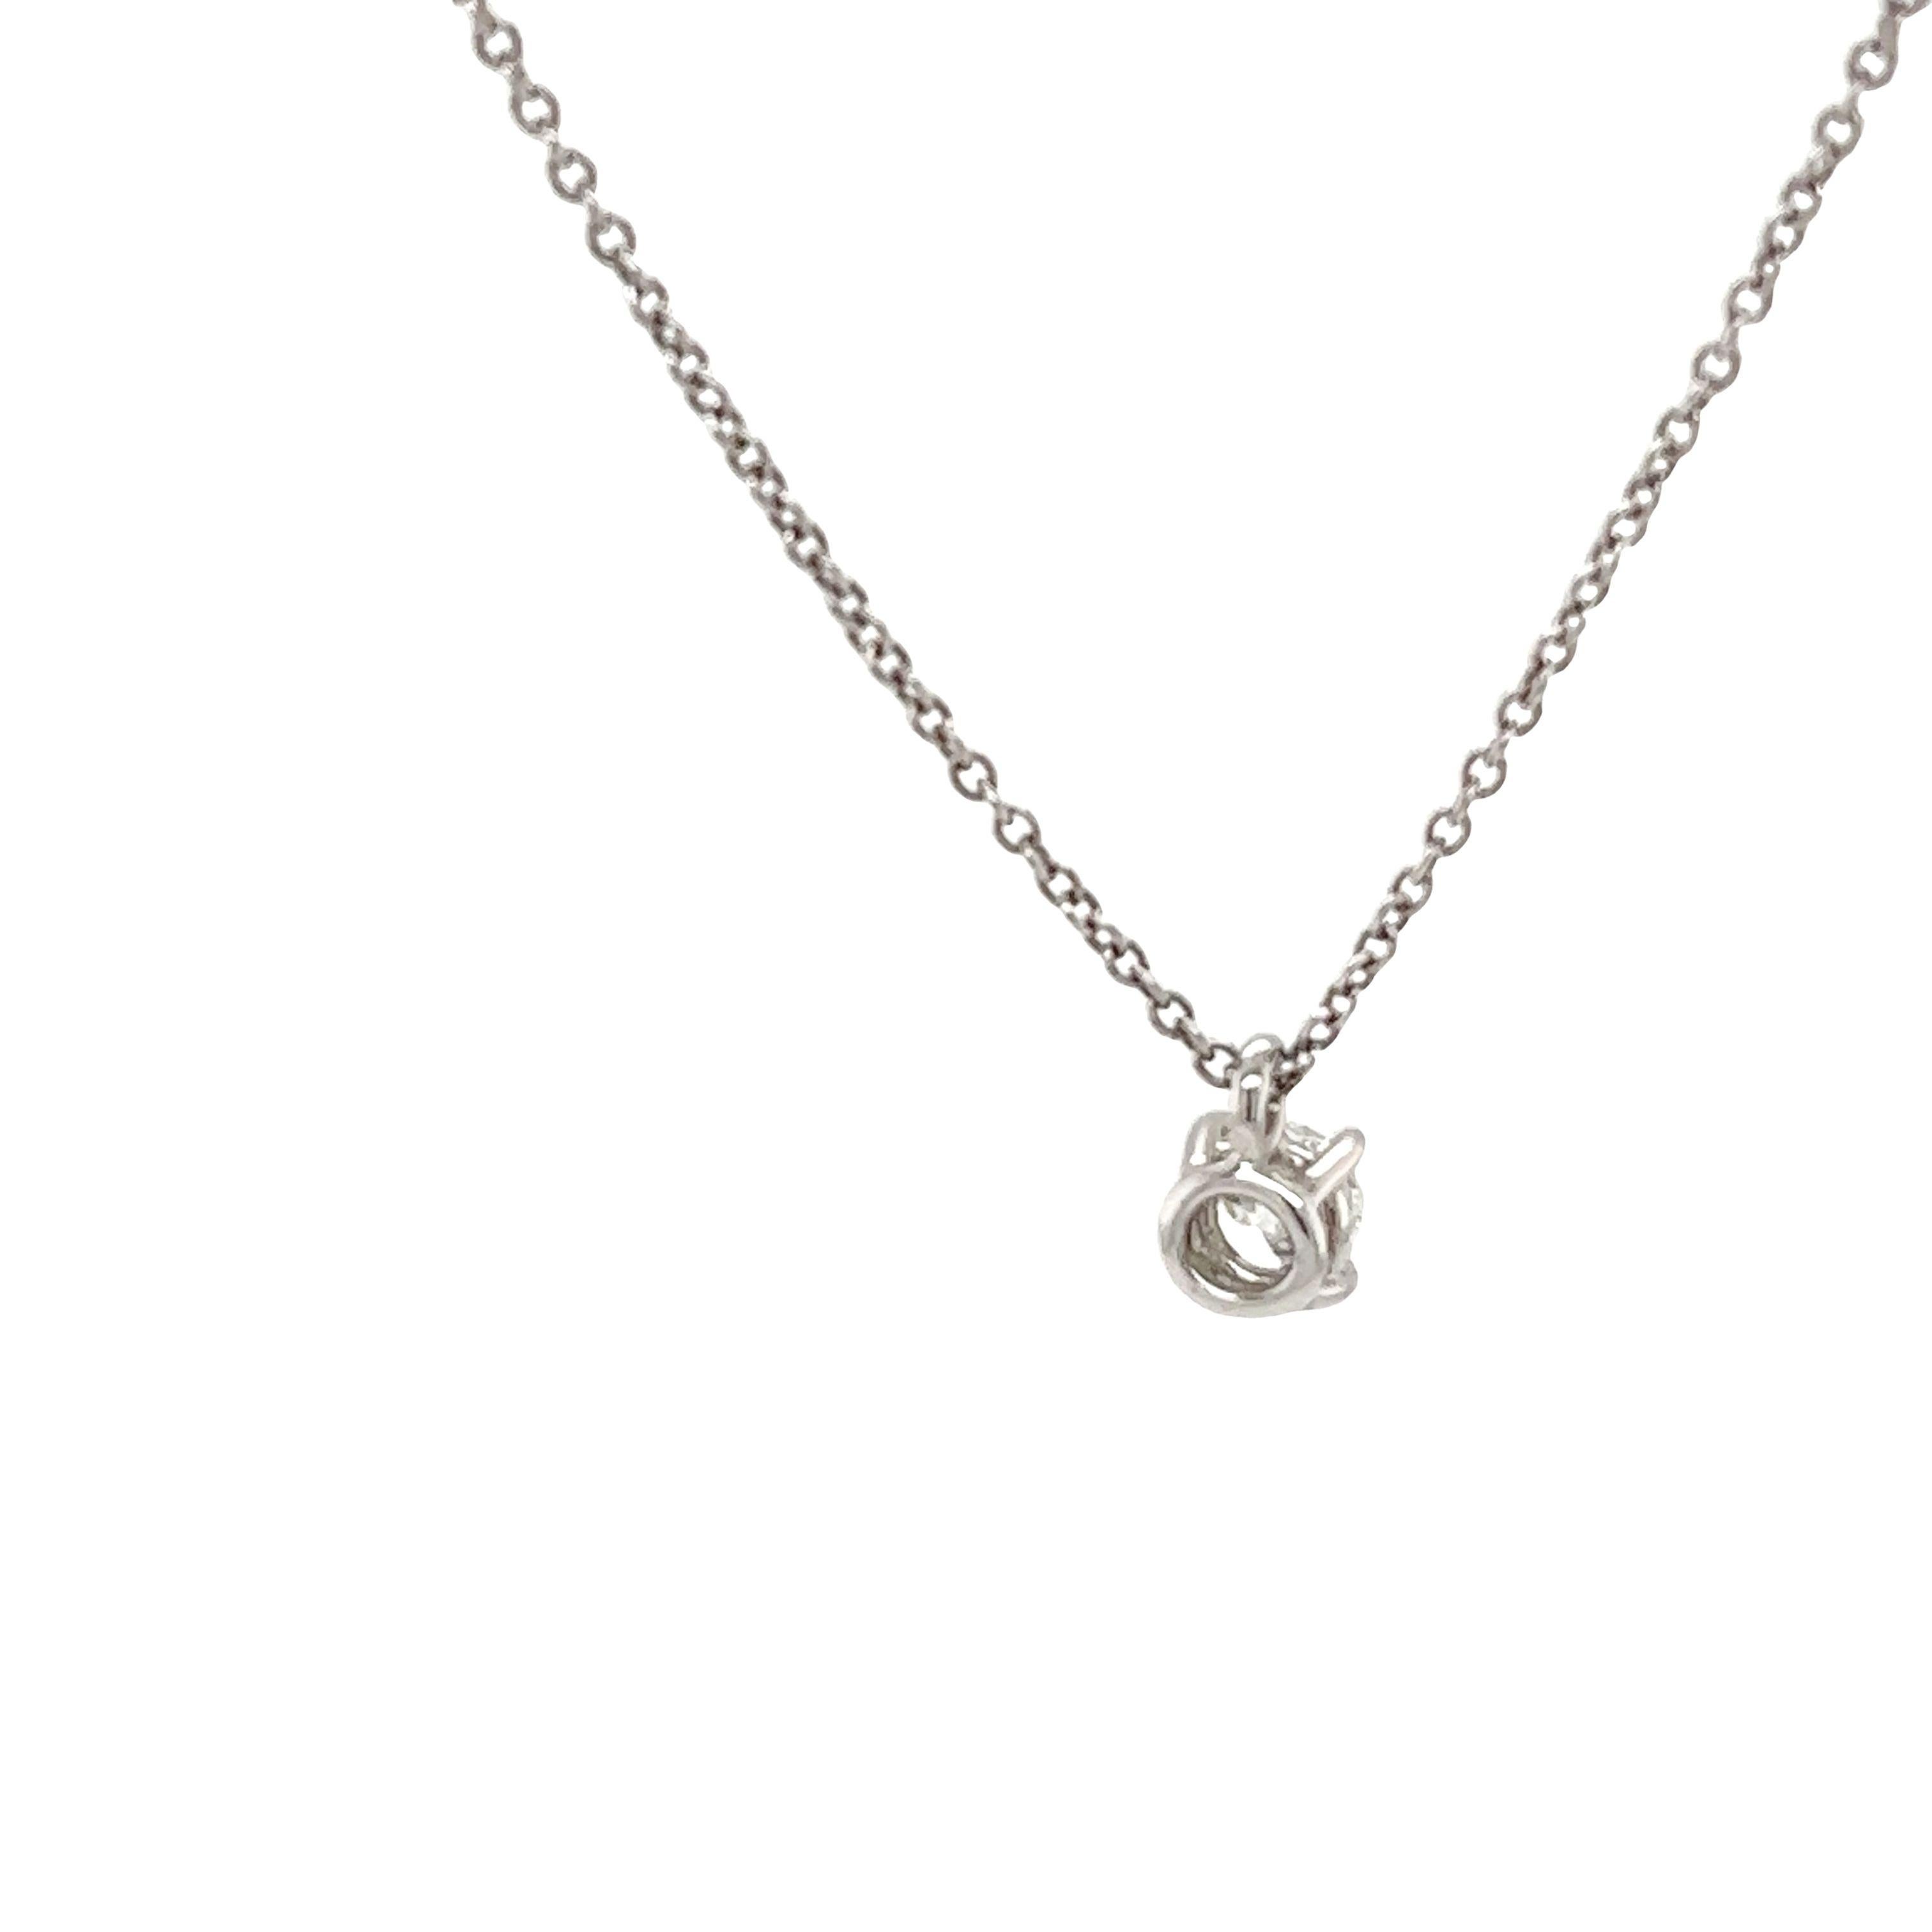 Tiffany & Co. solitaire diamond necklace 0.24ct on 16